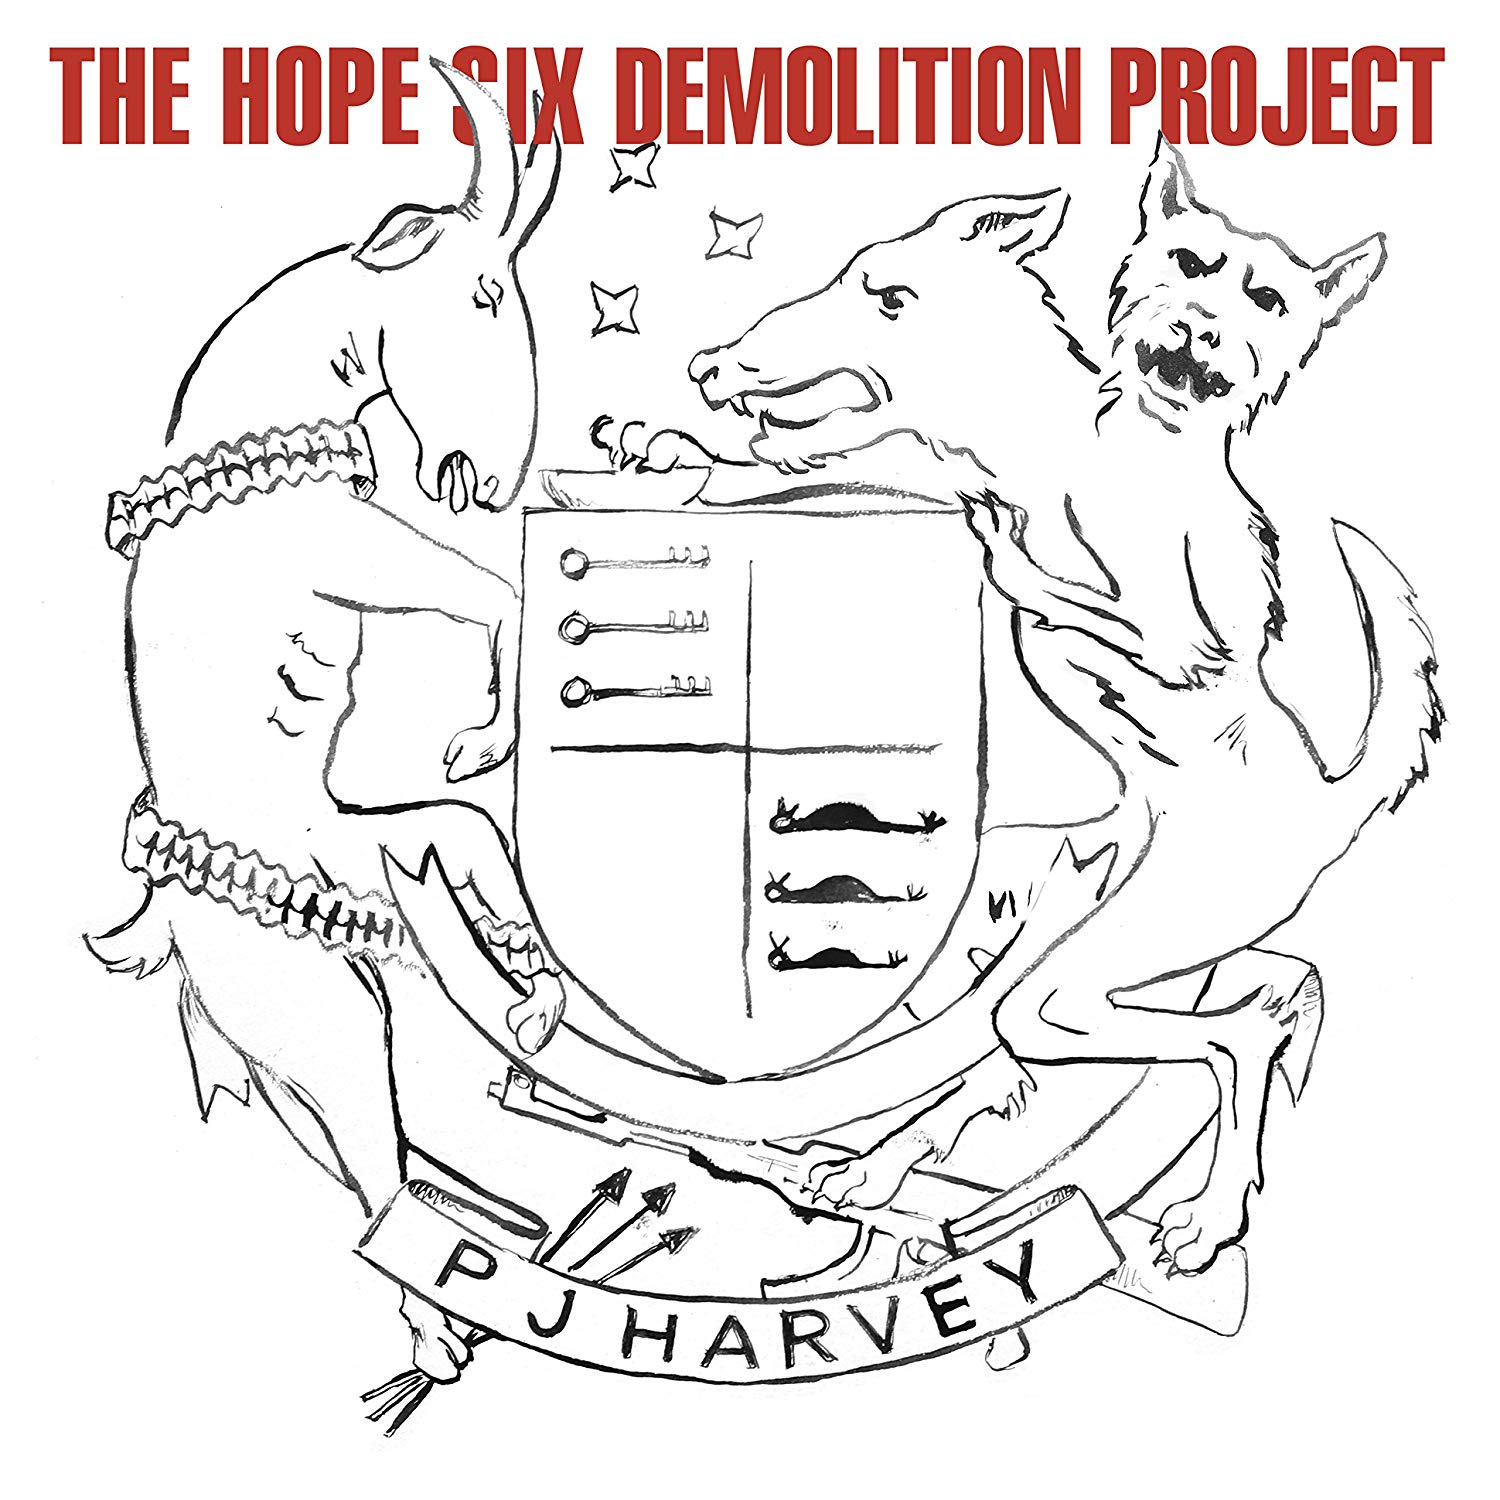  PJ HARVEY - THE HOPE SIX DEMOLITION PROJECT $26 180 gram vinyl a1 fold out poster download card @ 2016 Island Records 